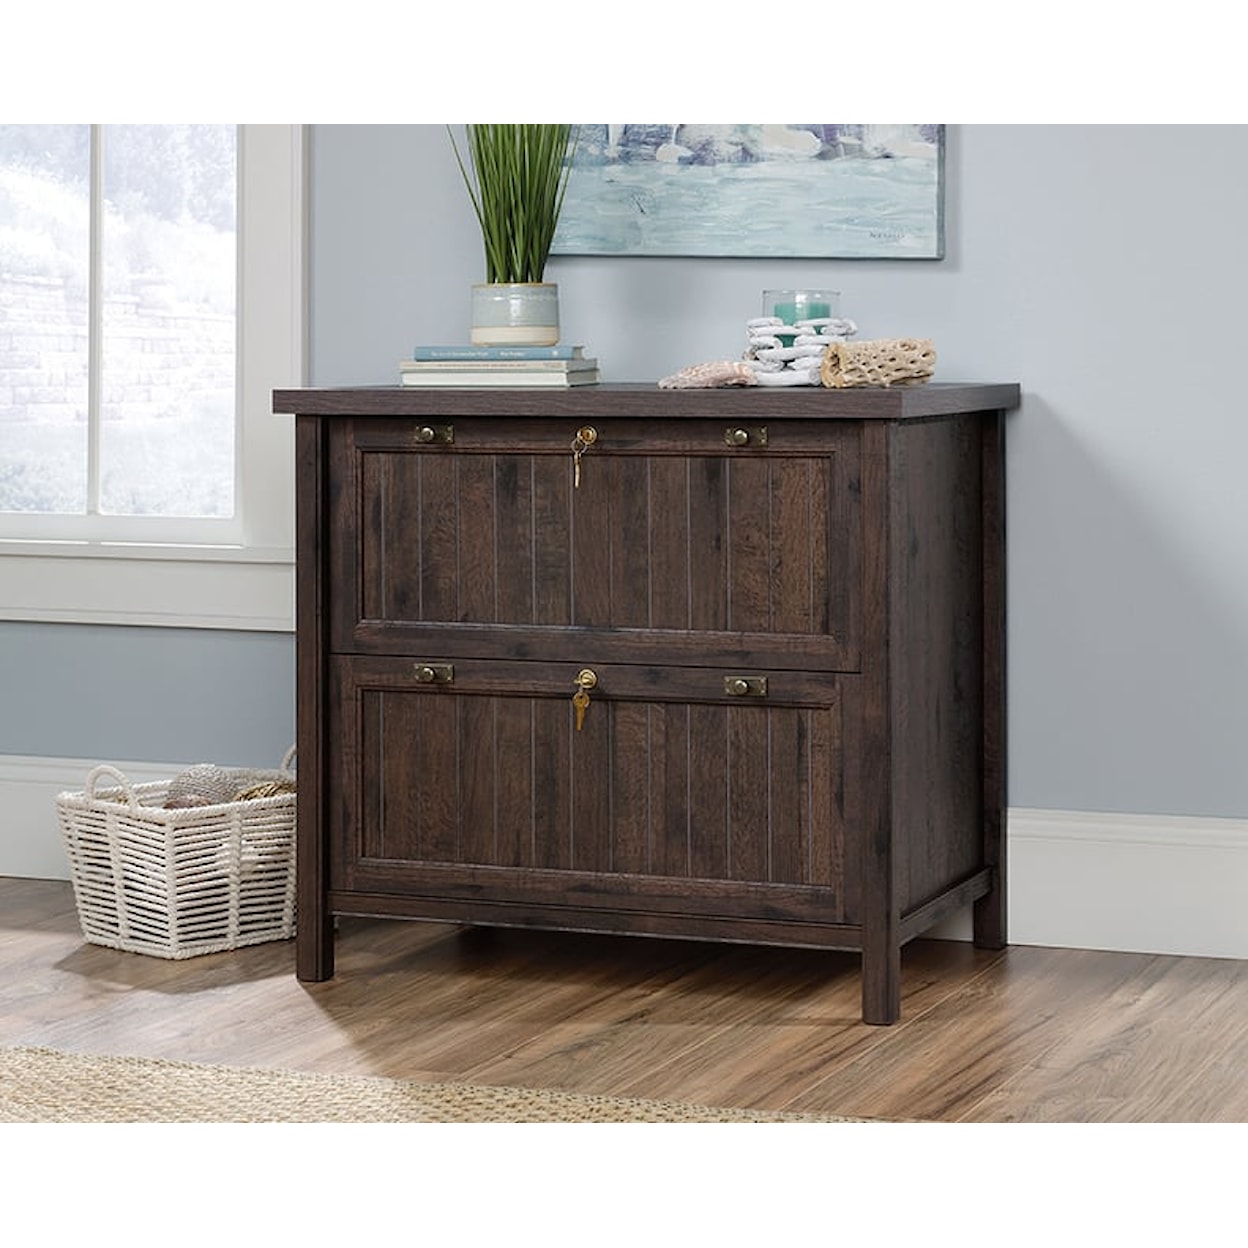 Sauder Cannery Bridge Lateral File Cabinet